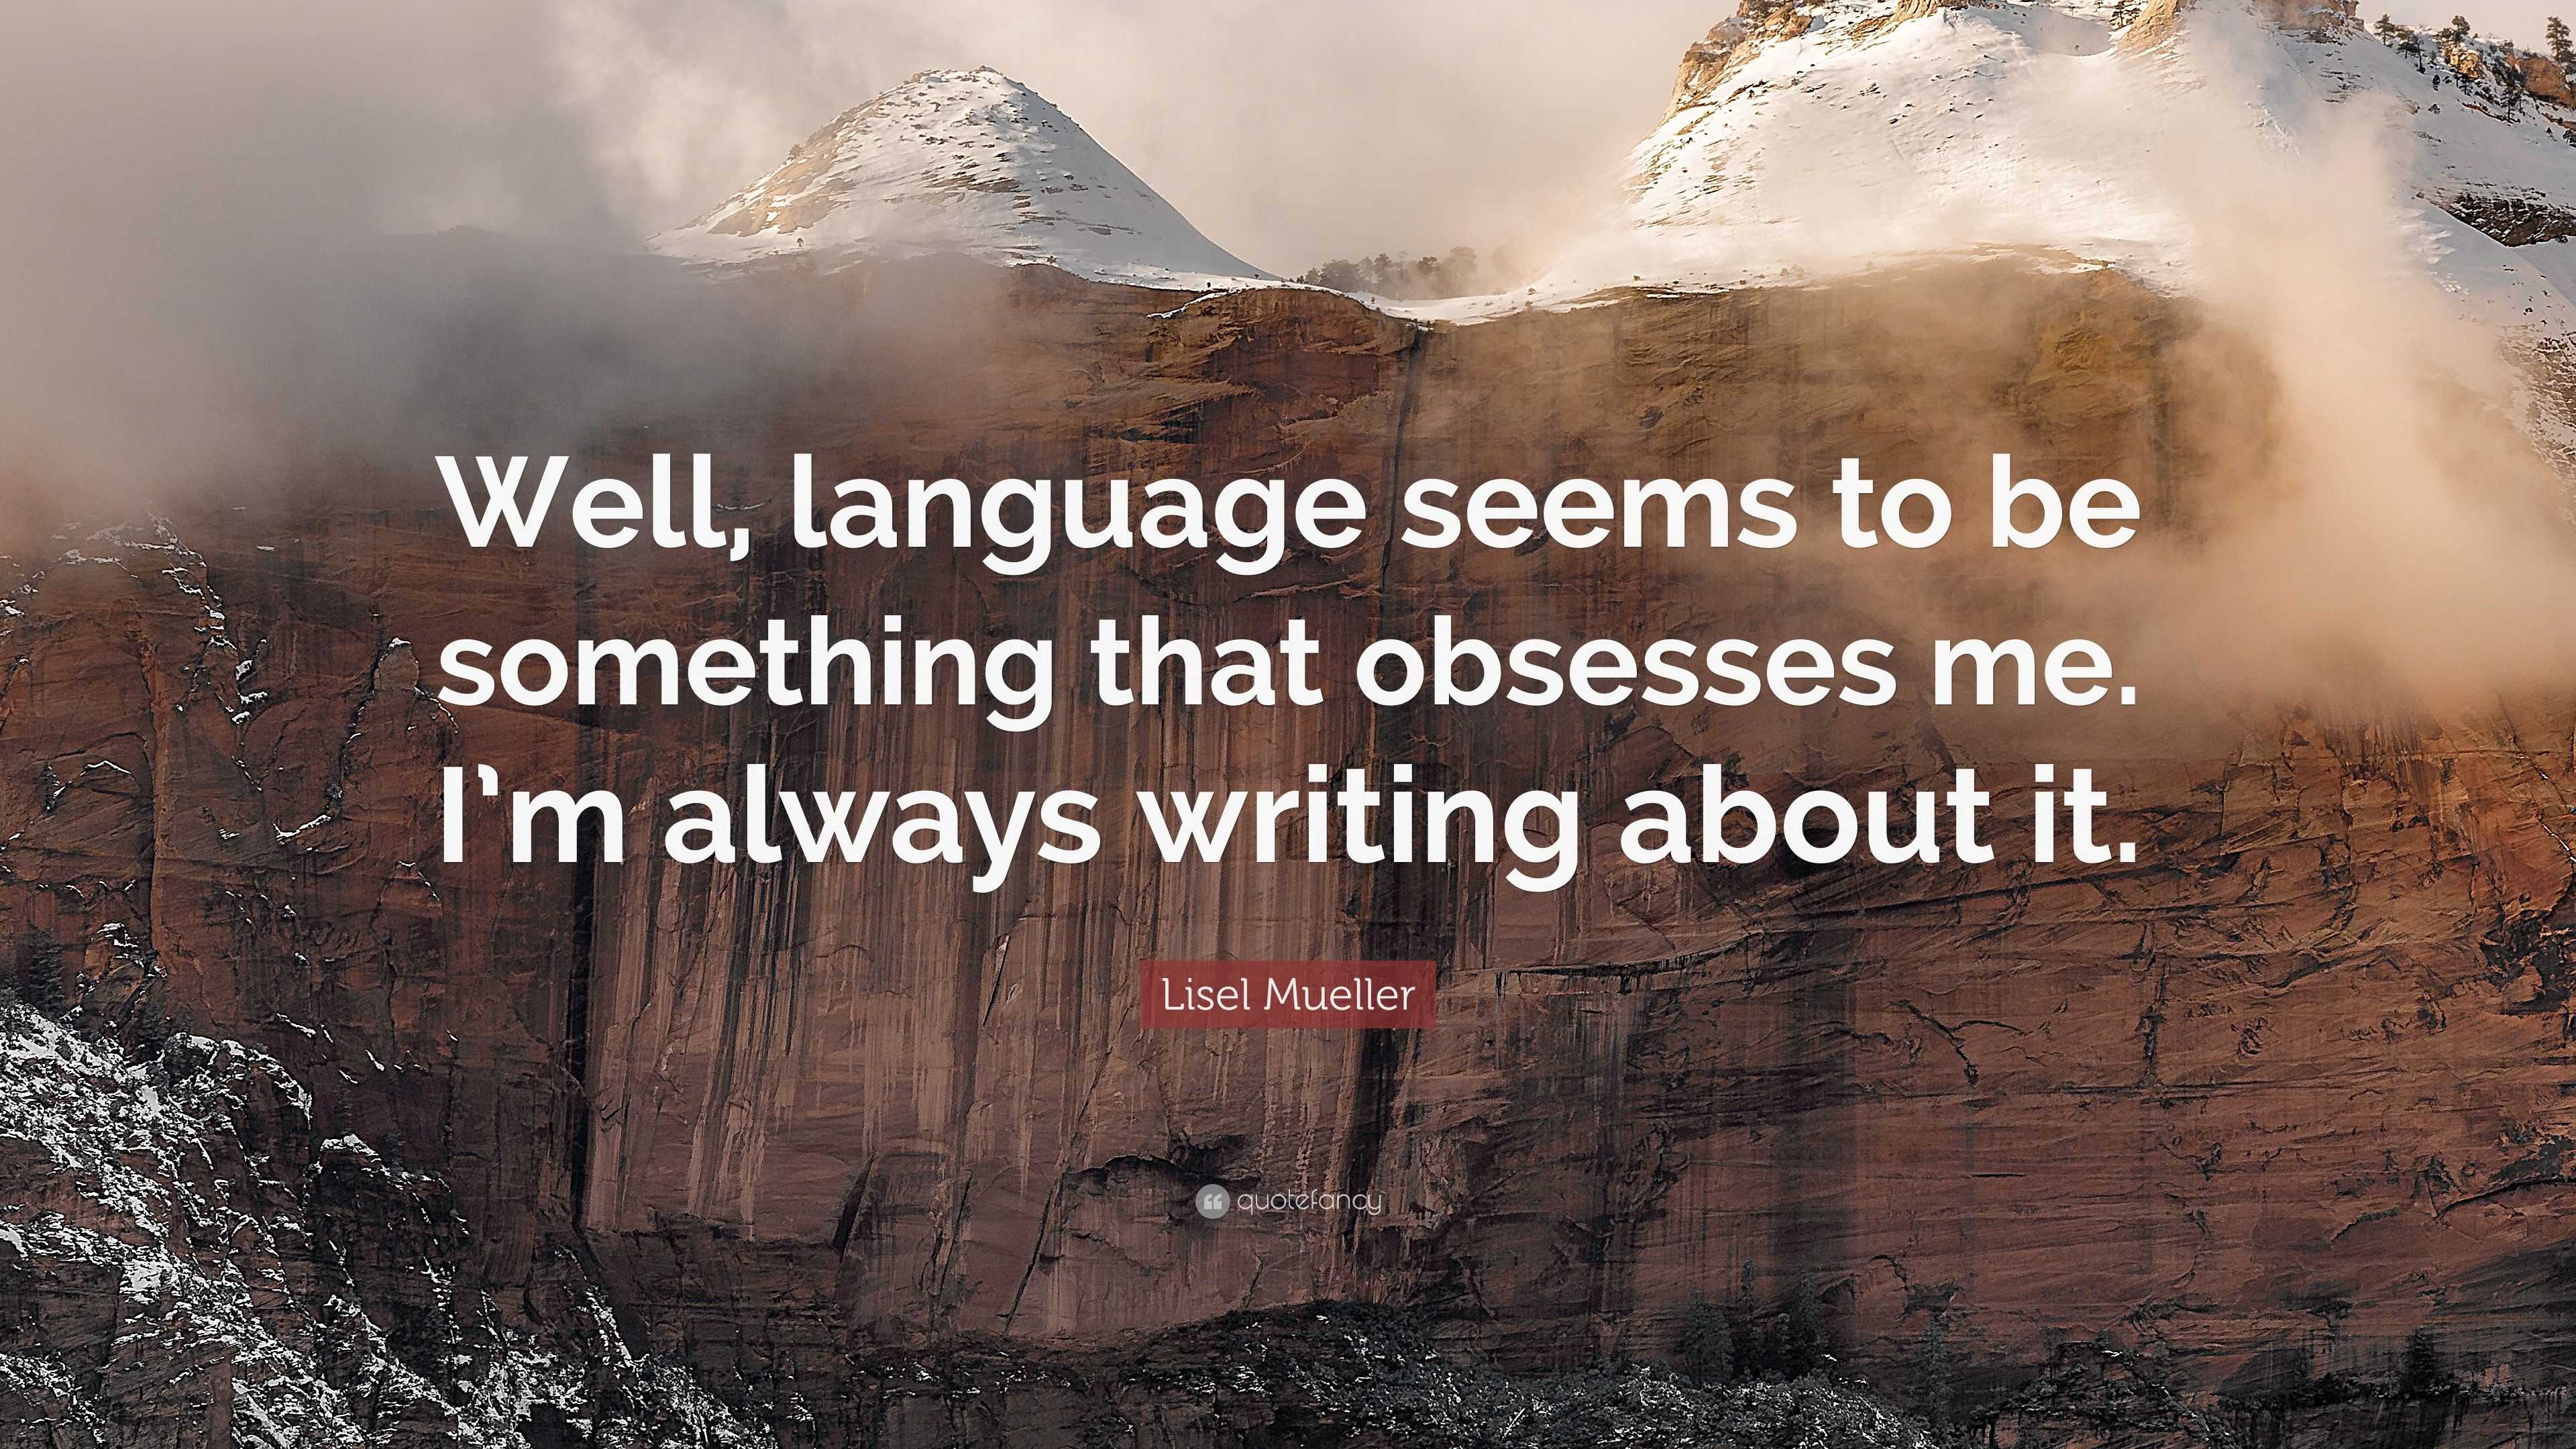 Lisel Mueller Quote: “Well, language seems to be something that ...